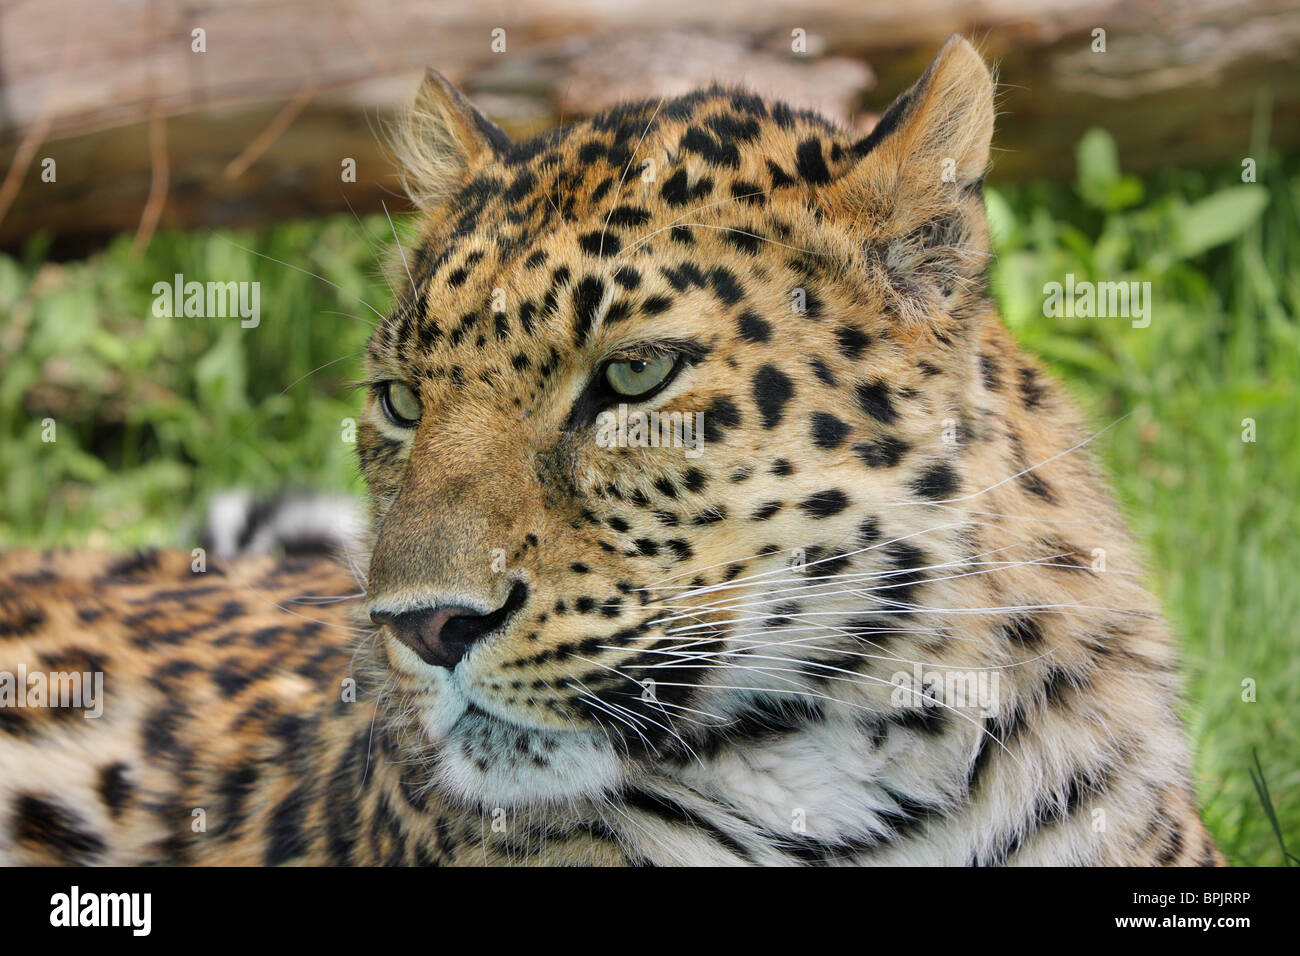 male leopard closeup showing facial details and pattern Stock Photo